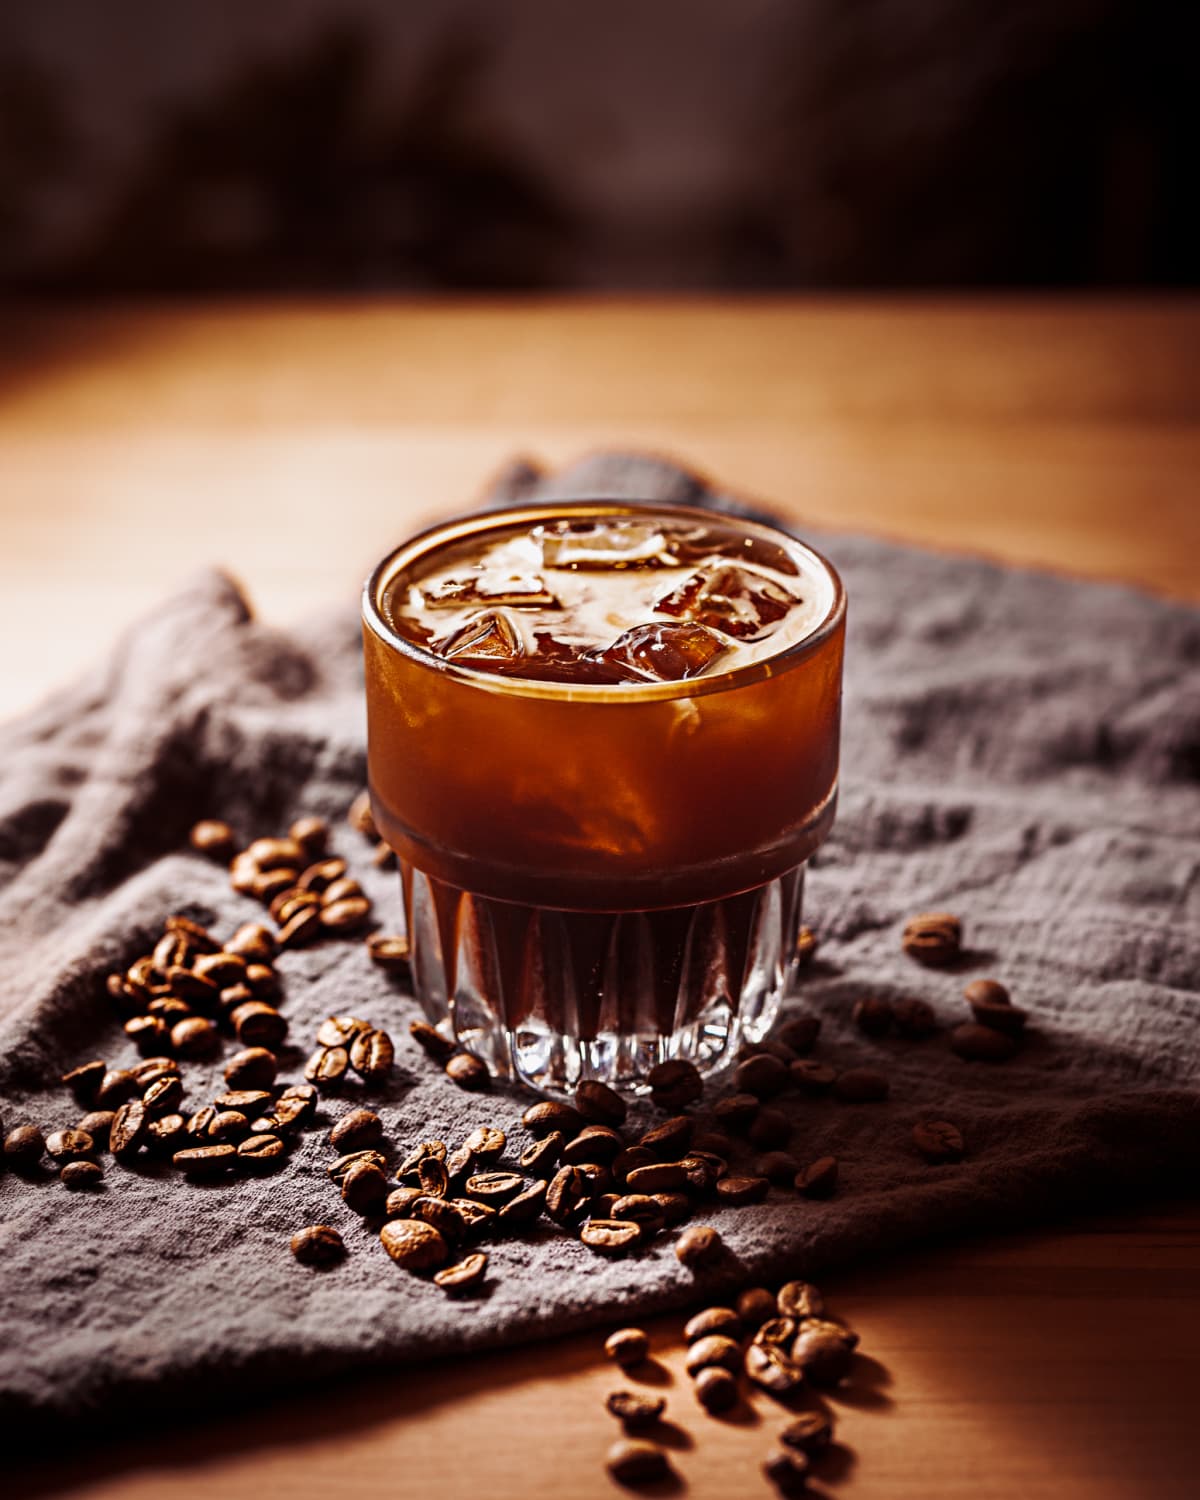 Cold Brew Coffee with roasted coffee bean, wooden board